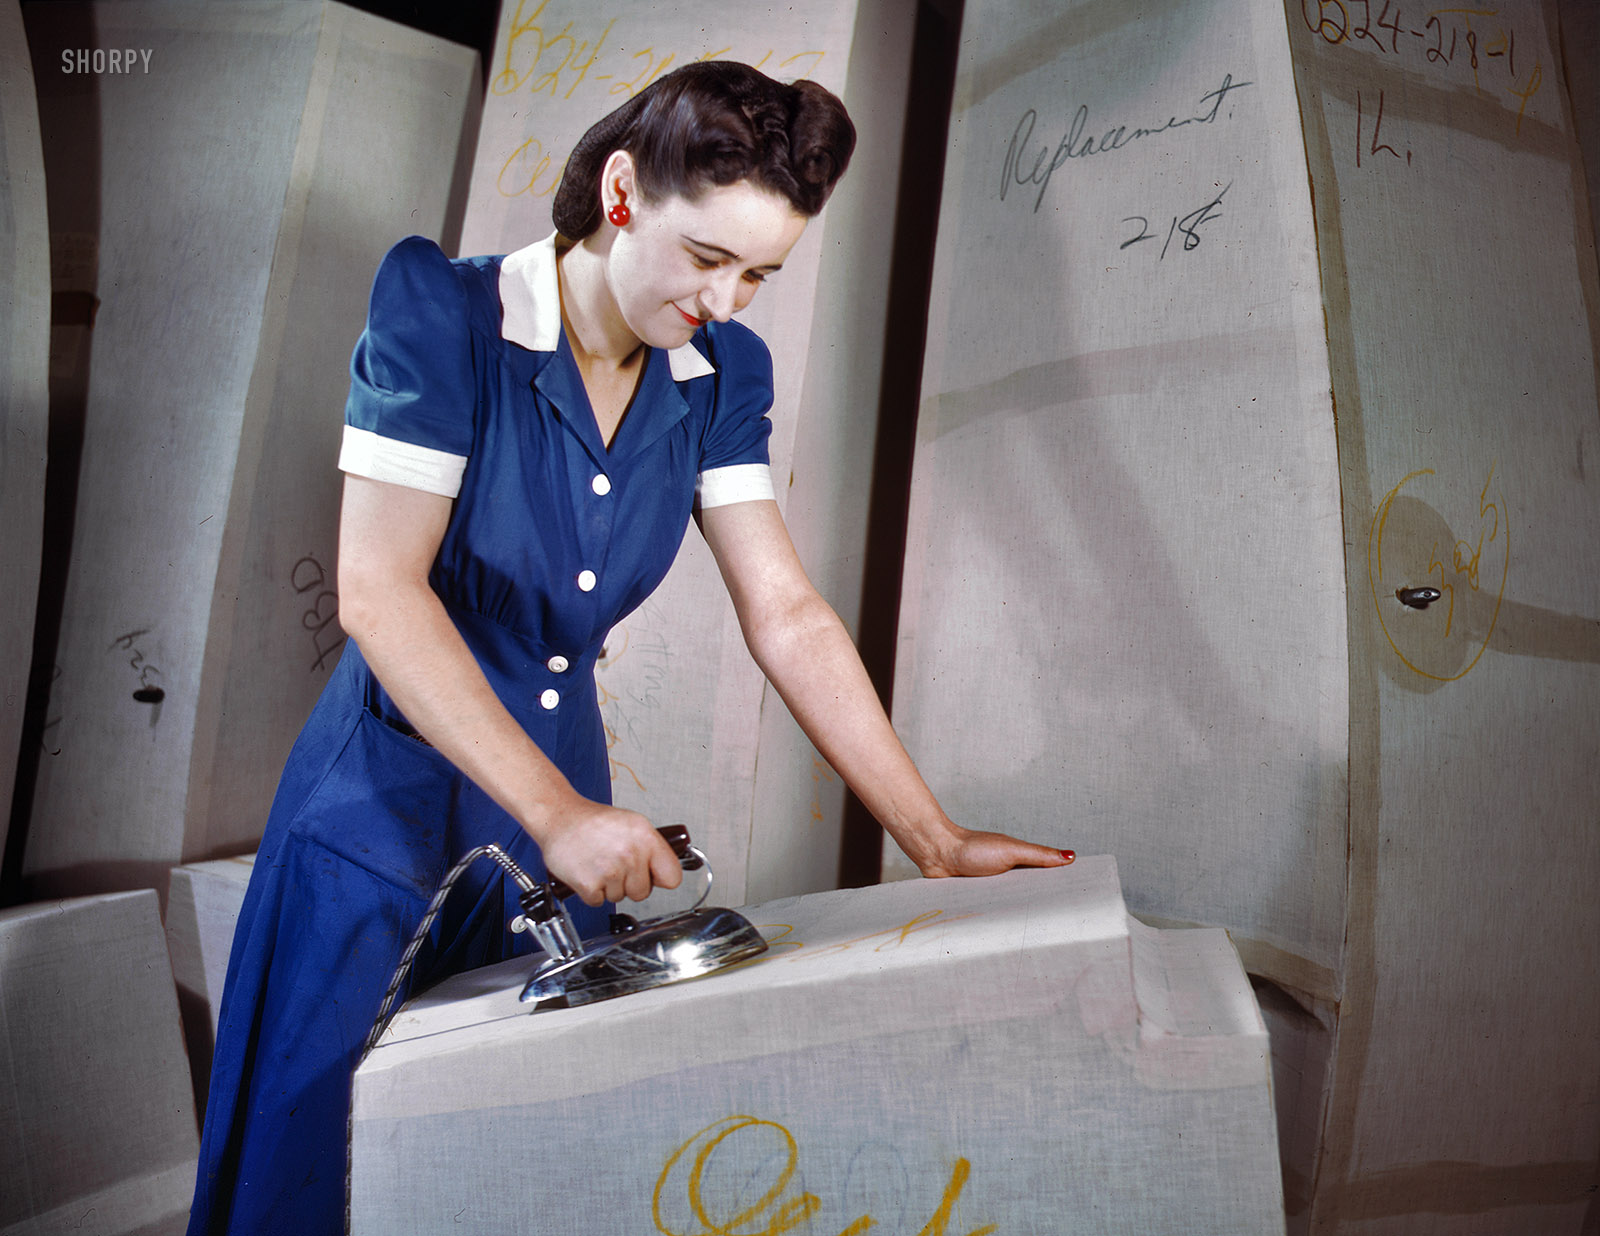 December 1941. Akron, Ohio. "Manufacture of self-sealing gas tanks, Goodyear Tire & Rubber Co." A patriotic ensemble of red, white and blue. 4x5 Kodachrome transparency by Alfred Palmer, Office of War Information. View full size.